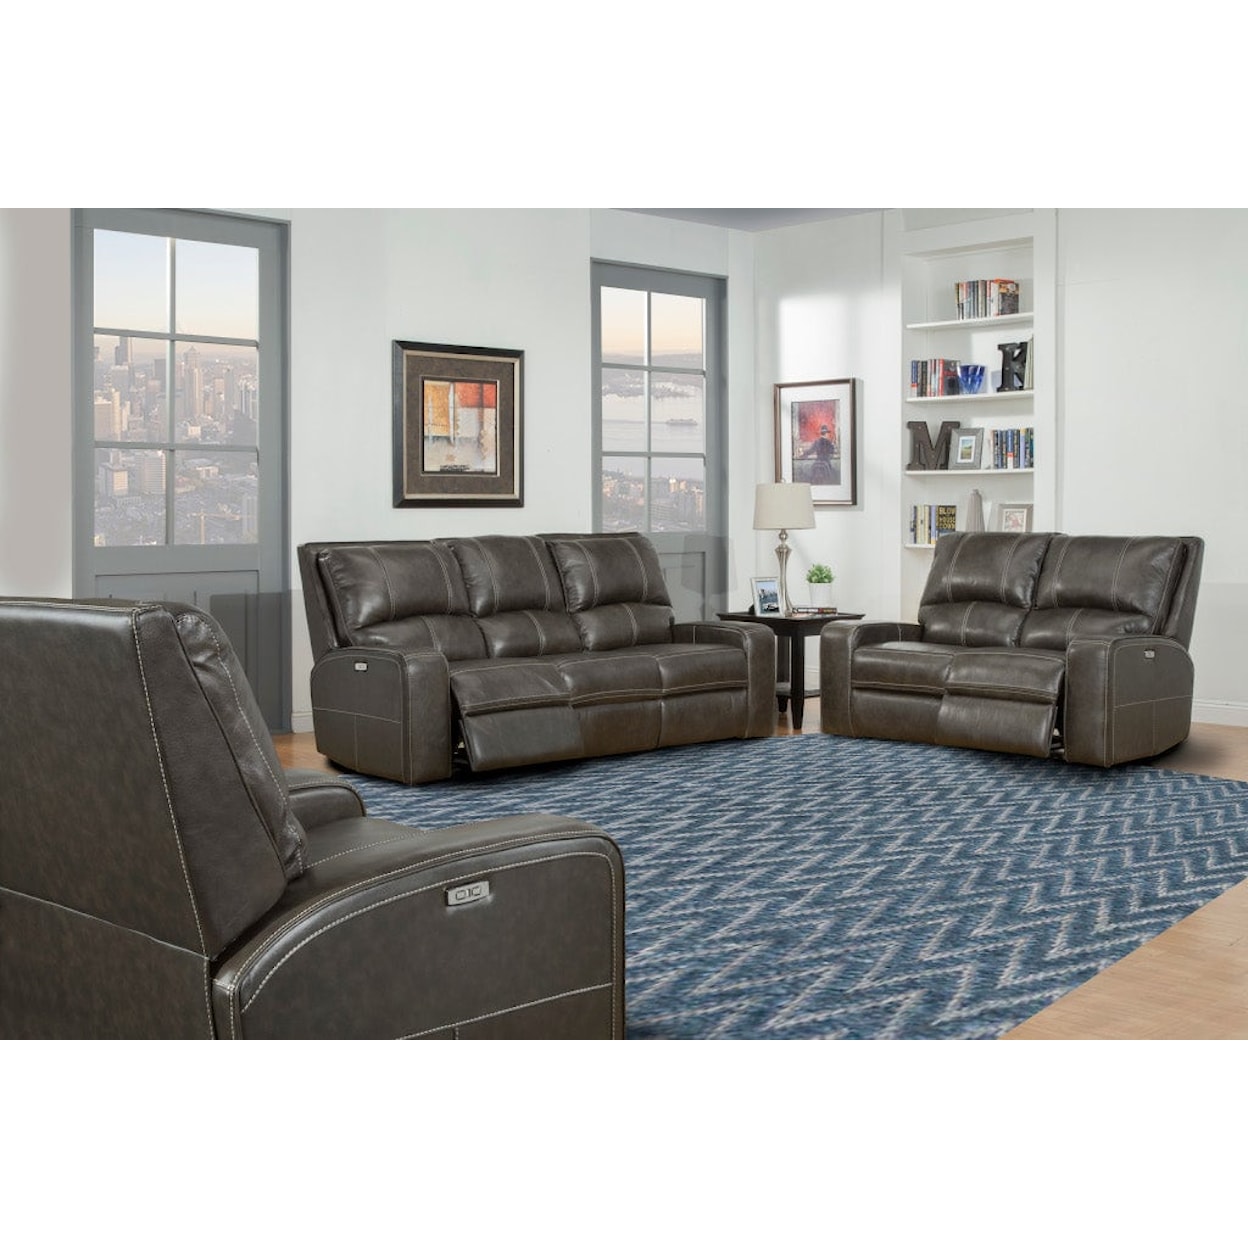 Paramount Living Swift Living Room Group